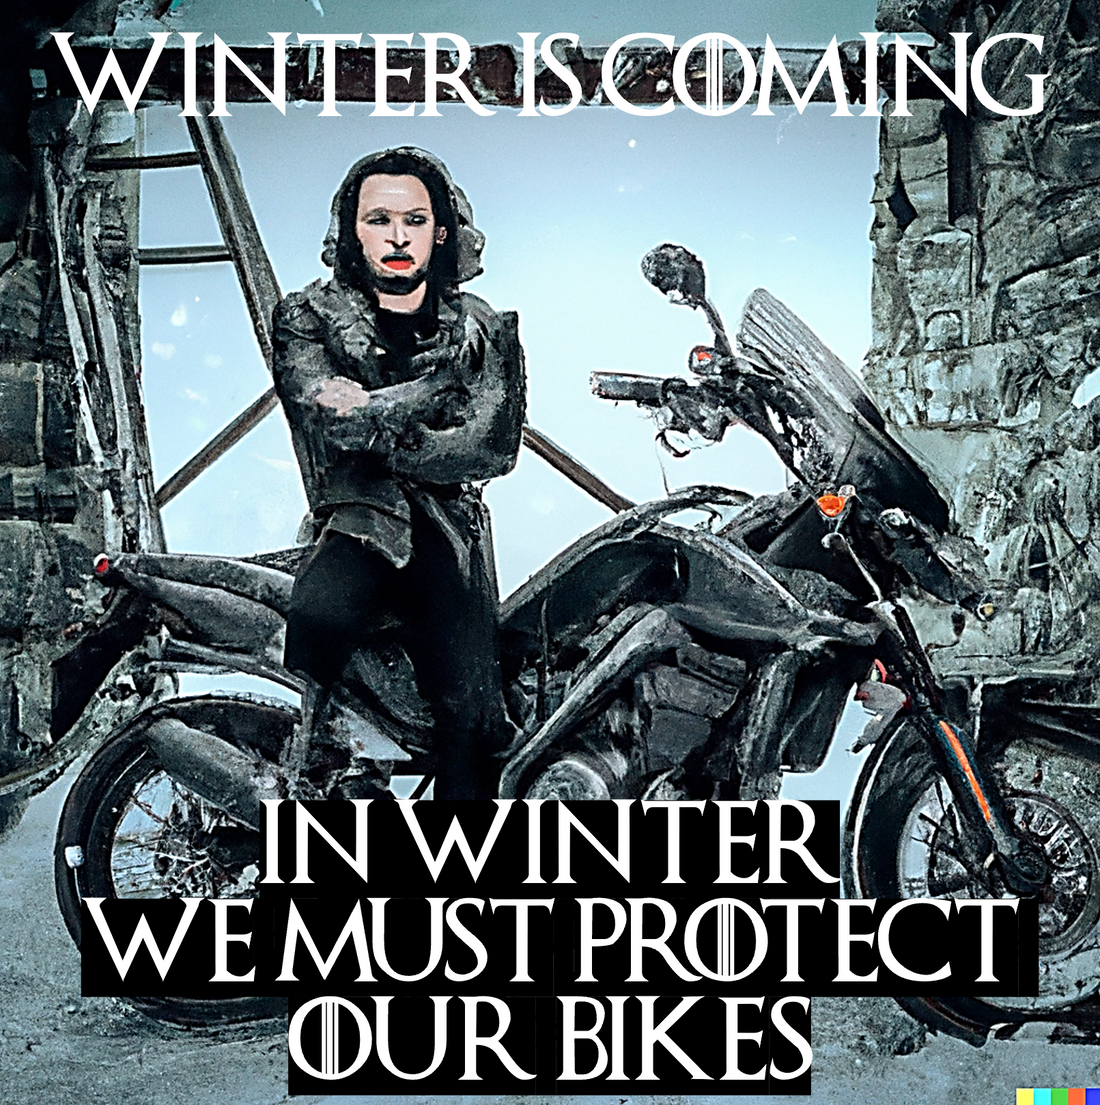 Winter is Coming: Why Radmoto’s Ultimate Winter Storage is the Night's Watch for Your Ride